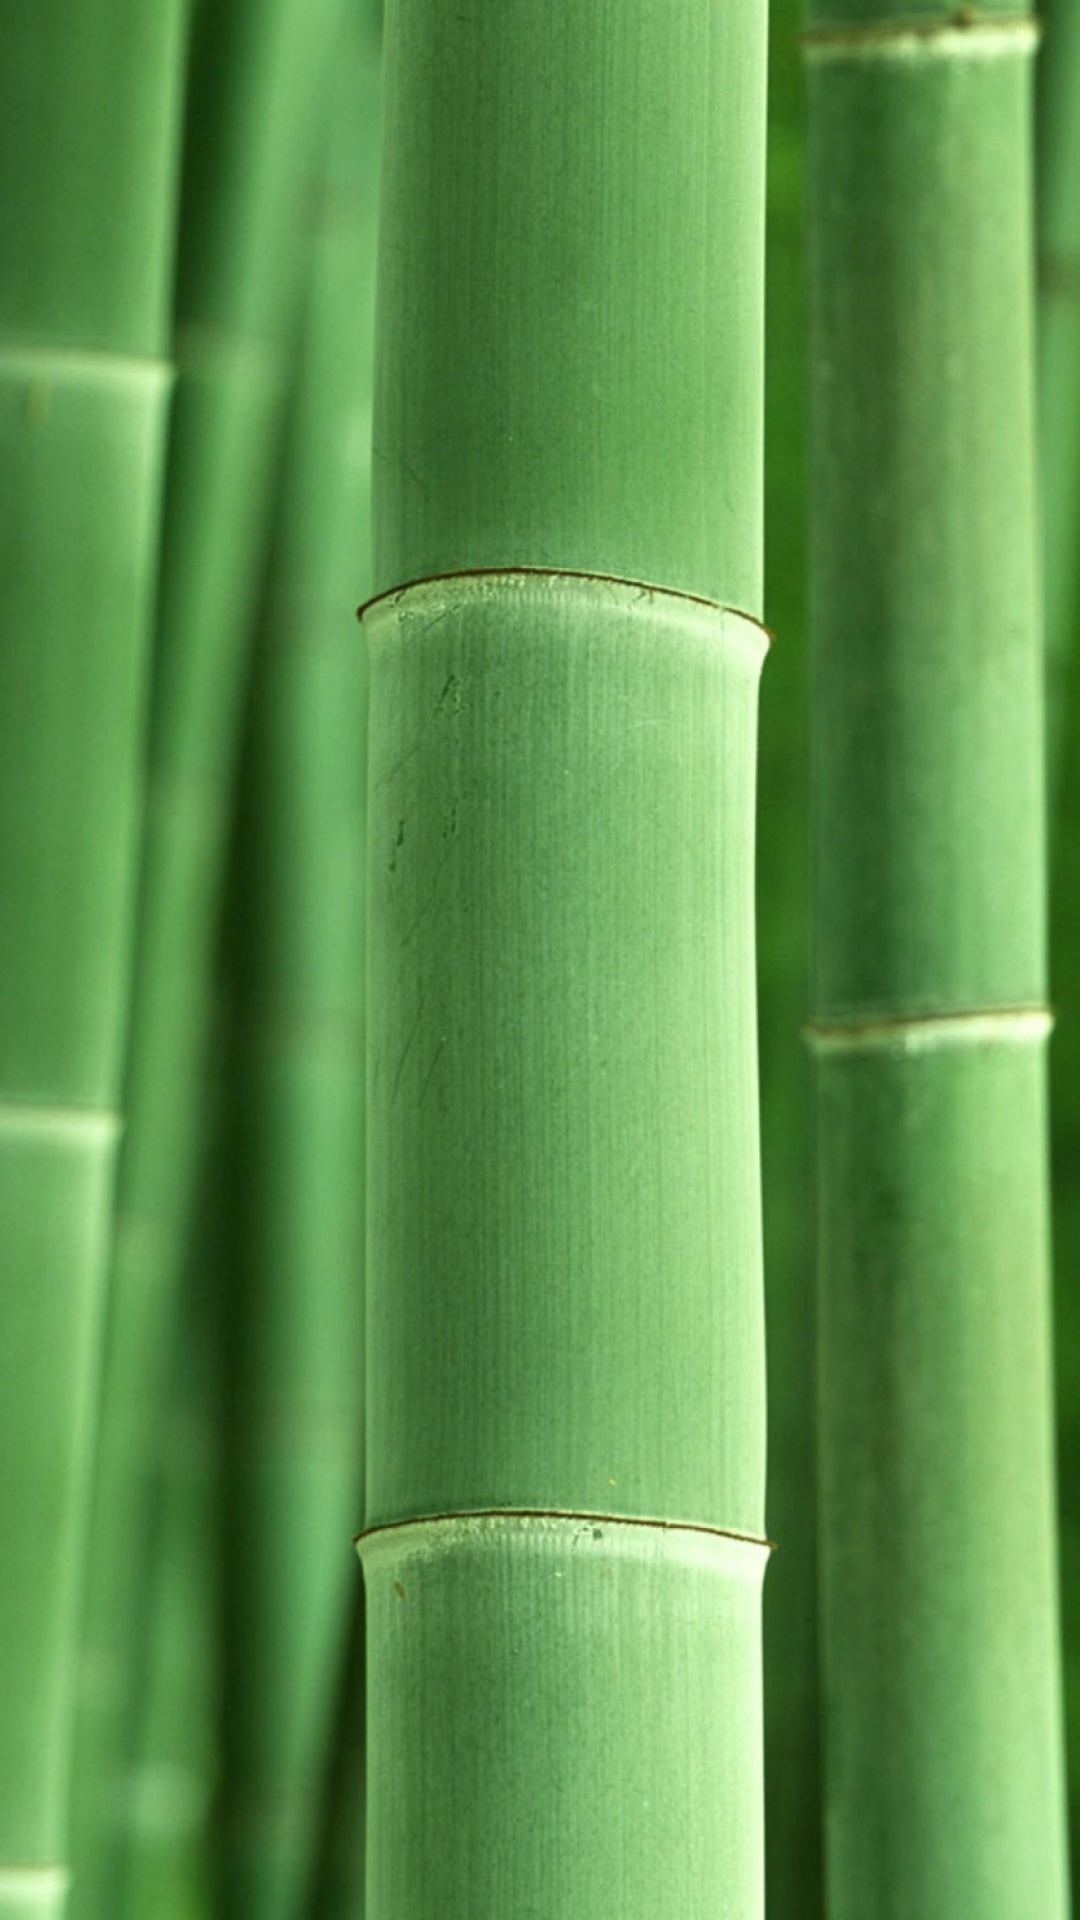 Bamboo: Plant is used for building materials, as a food source, and as a raw product. 1080x1920 Full HD Wallpaper.